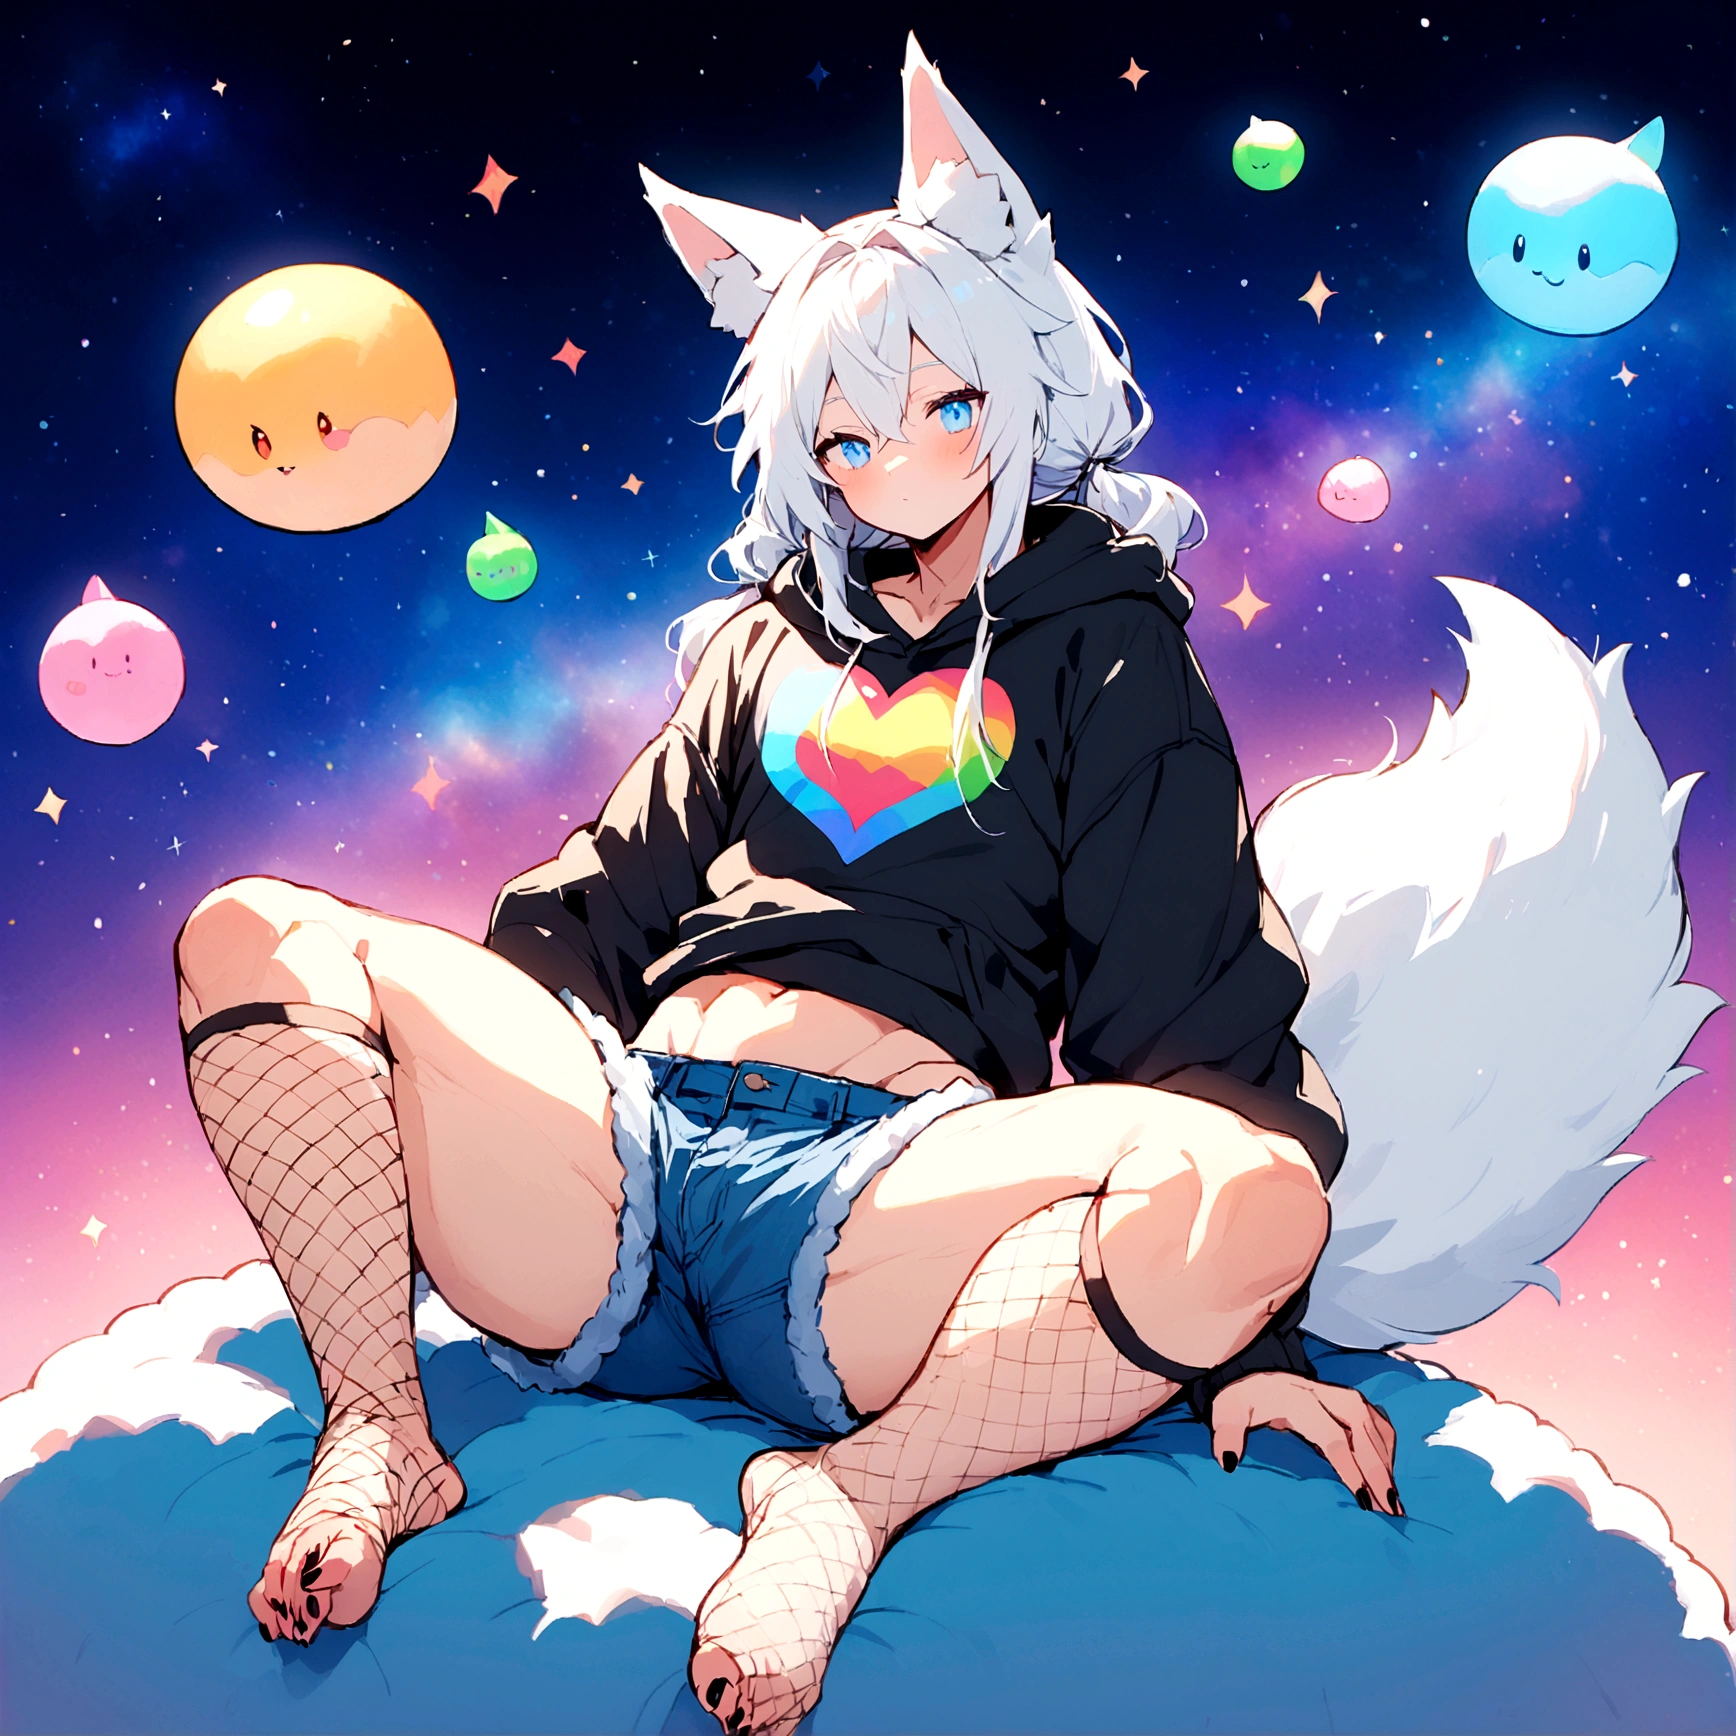 a cute adult male with wolf ears, long white hair, long locks, has a wolf tail, wearing a loose cropped black hoodie, wearing a pair of denim short shorts and fishnet stockings, thick thighs, wide hips, relaxing on mound of fluffy multi colored kawaii plushies, short, very slim, showing slender tummy, heart on hoodie, squishy thighs, has glowing blue eyes. alone, solo (ALONE)(SOLO), colorful galaxy backround, has abs